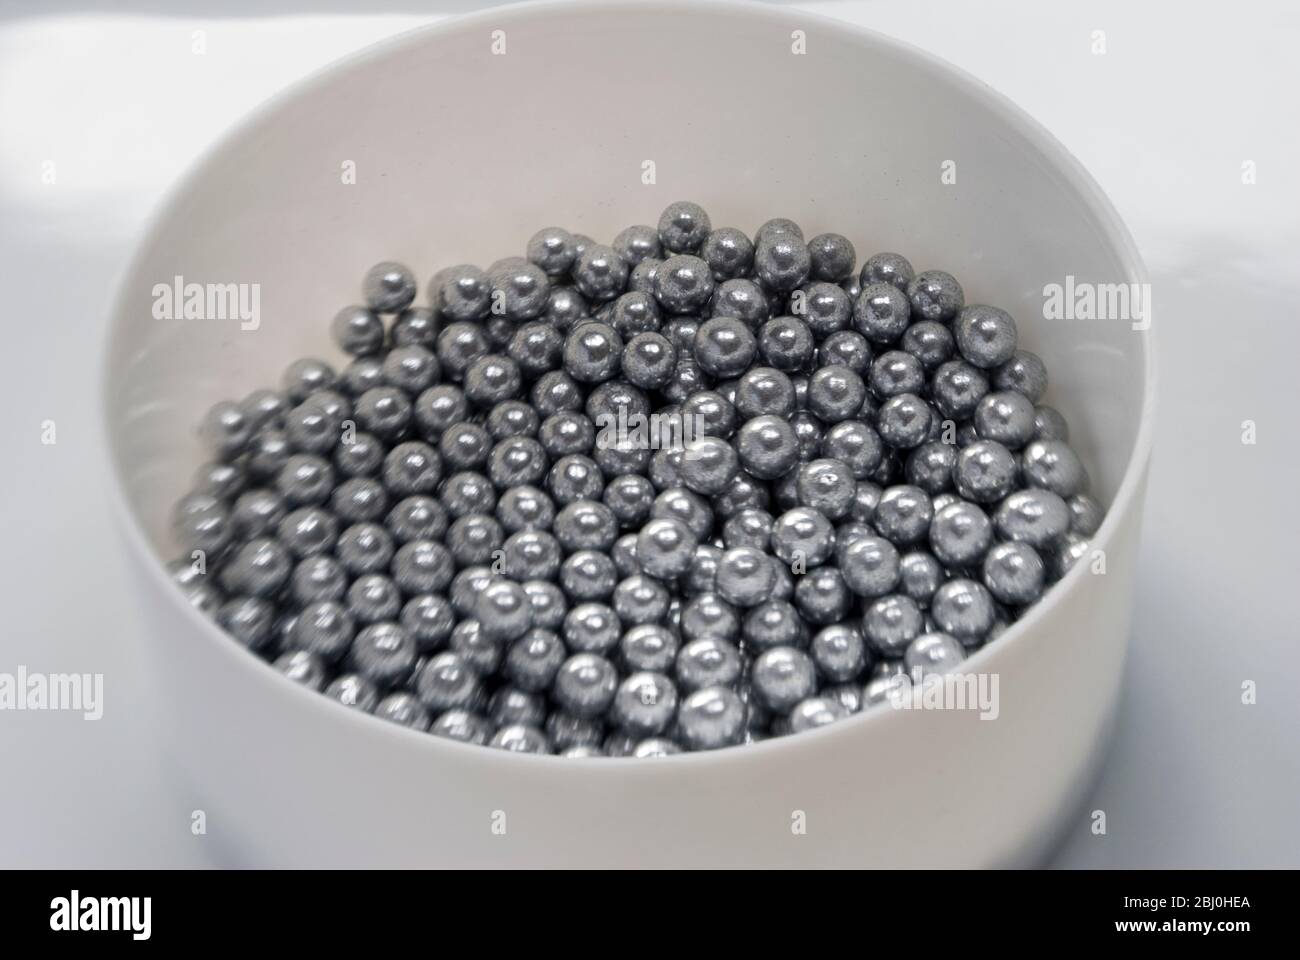 Edible silver balls for cake decorating, Shot with Lensbaby lens for blurred edge effect - Stock Photo